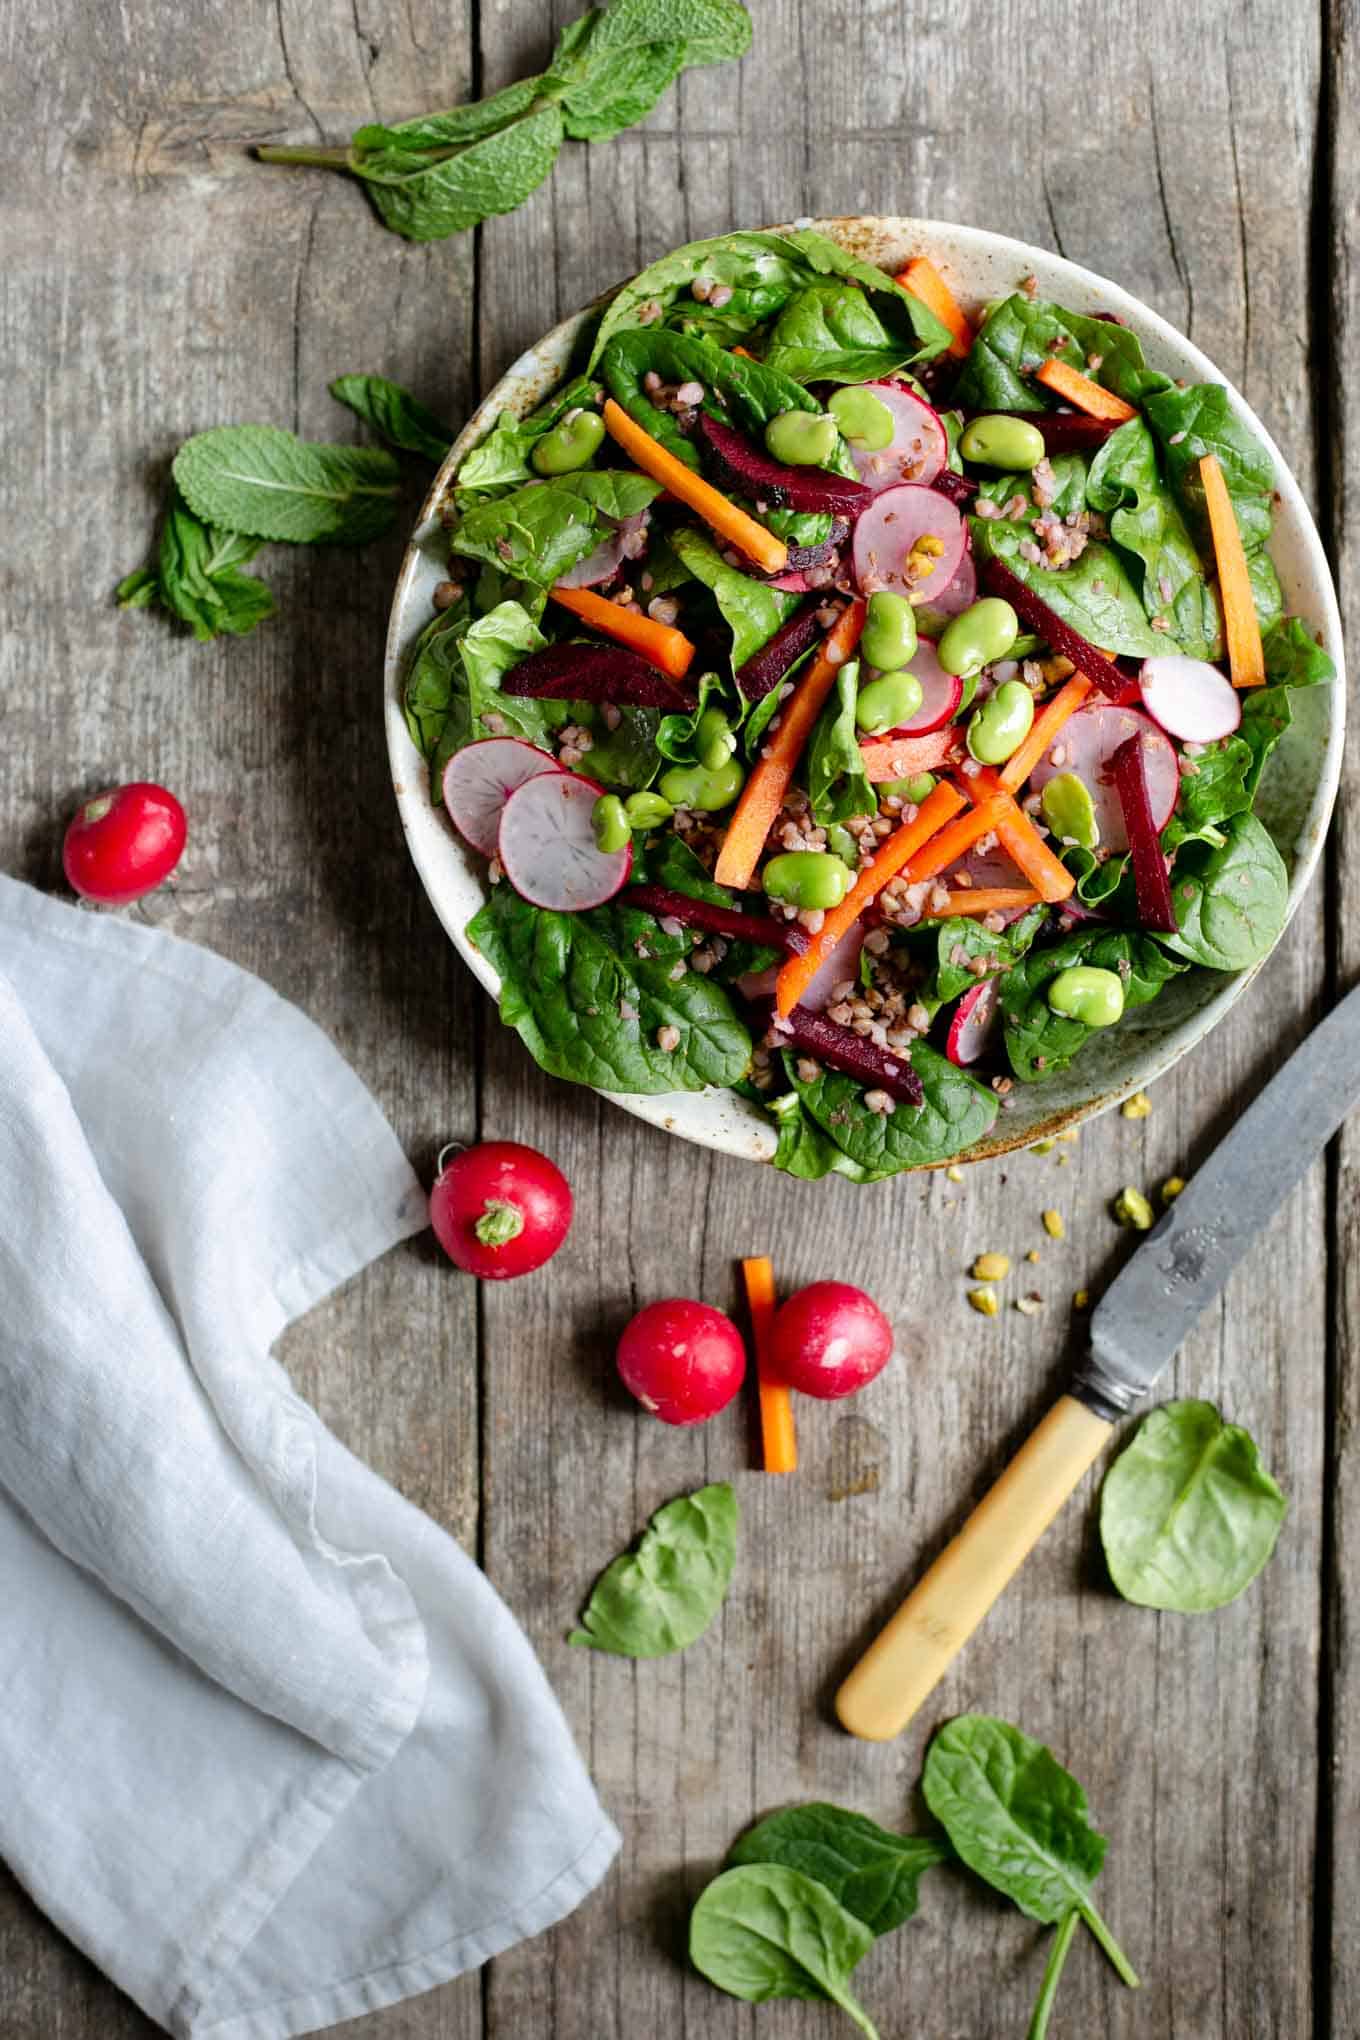 Super clean spinach and beetroot salad #saladrecipe #veganfood #plantbased #foodphotography | via @annabanana.co